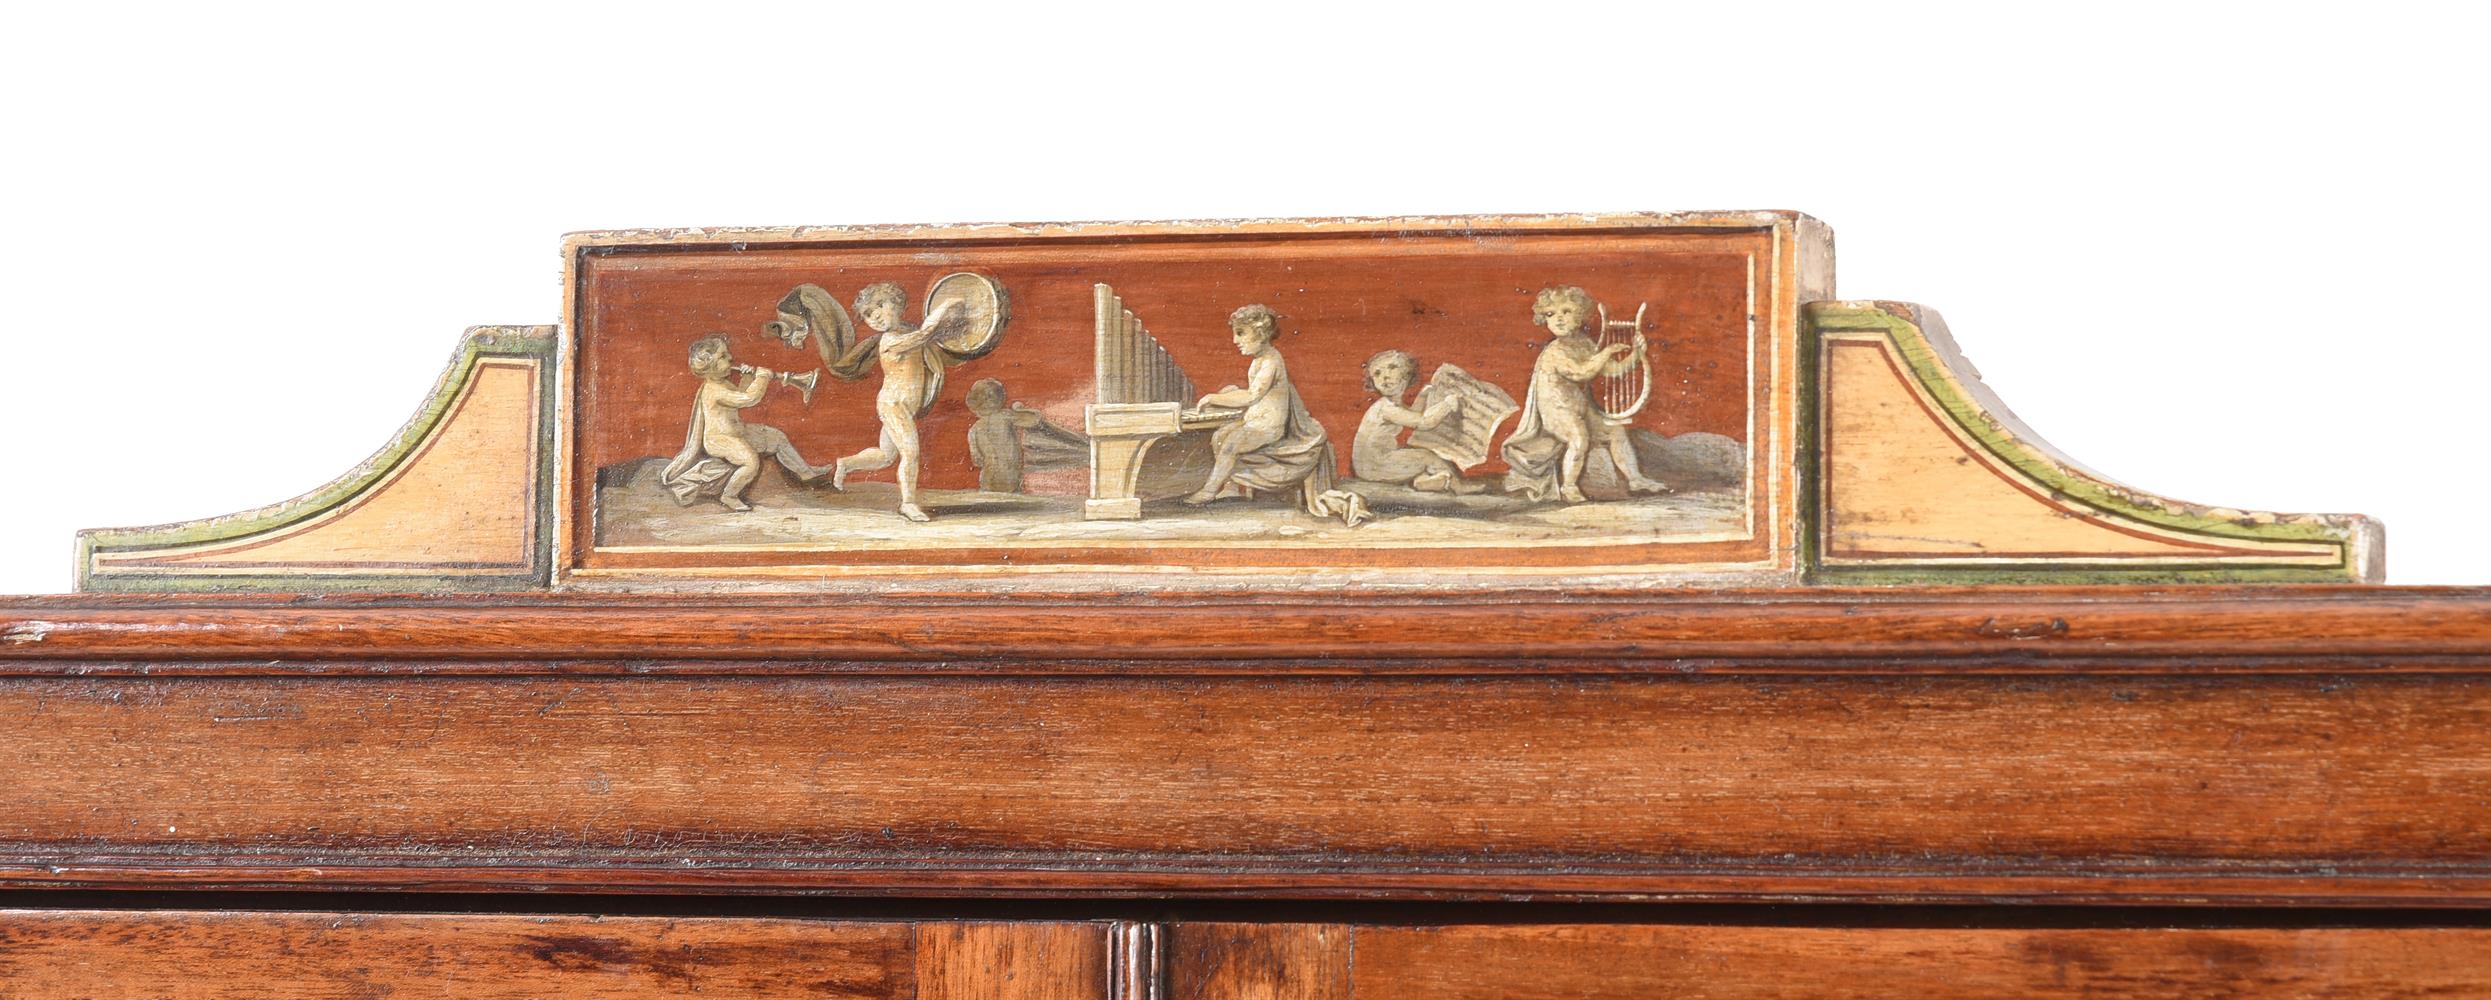 A GEORGE III MAHOGANY AND PAINTED WALL CABINET OR BOOKCASE, LATE 18TH CENTURY - Image 3 of 4